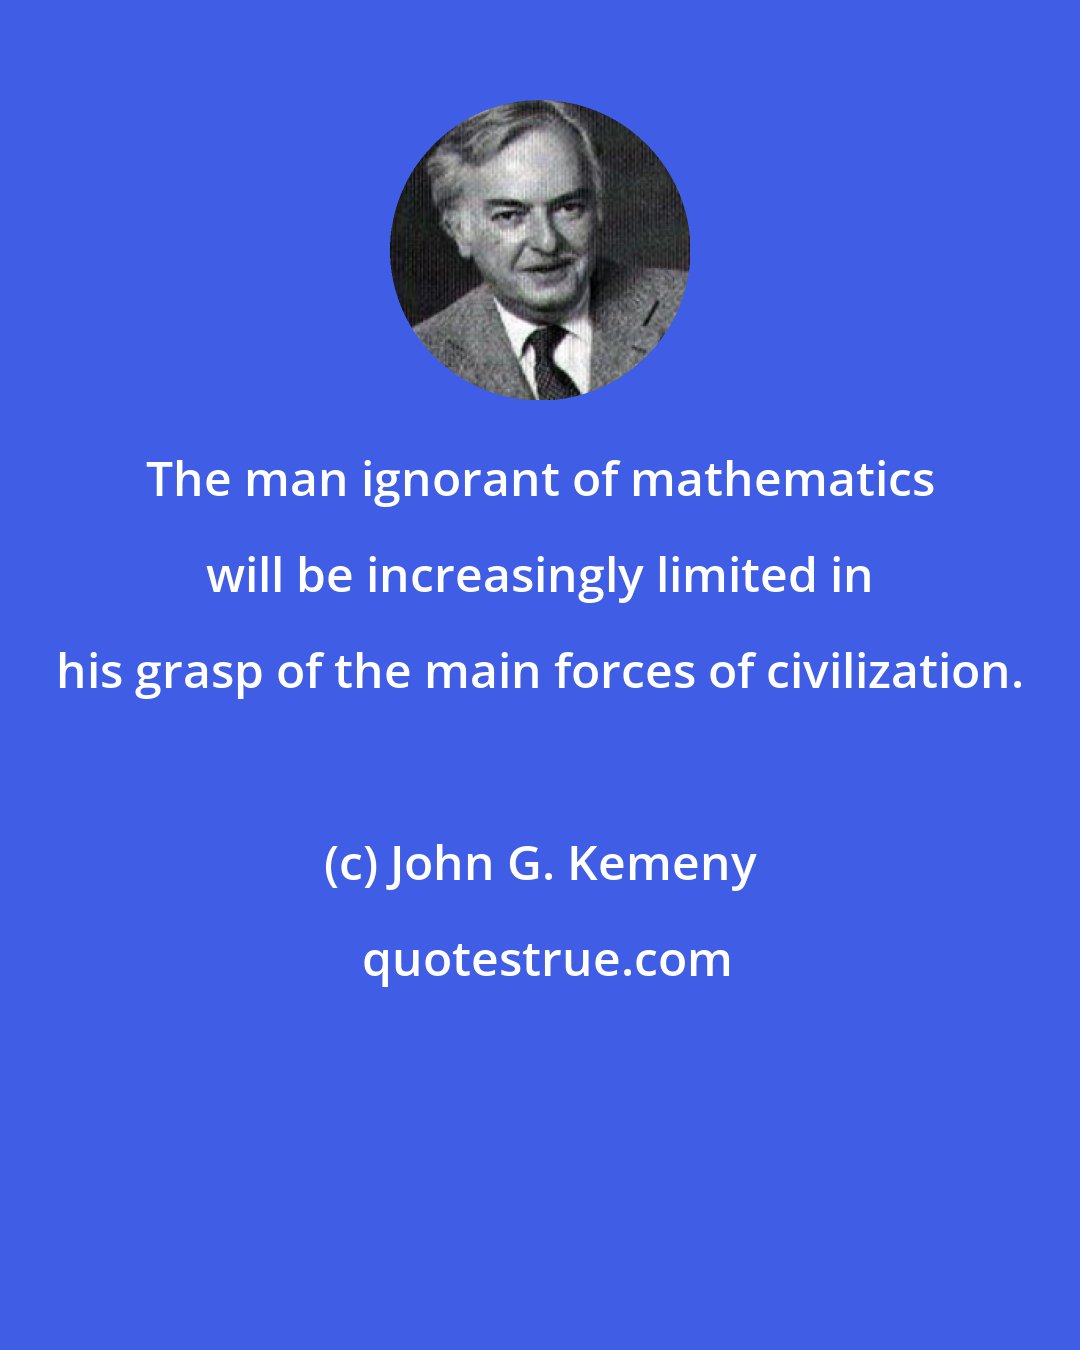 John G. Kemeny: The man ignorant of mathematics will be increasingly limited in his grasp of the main forces of civilization.